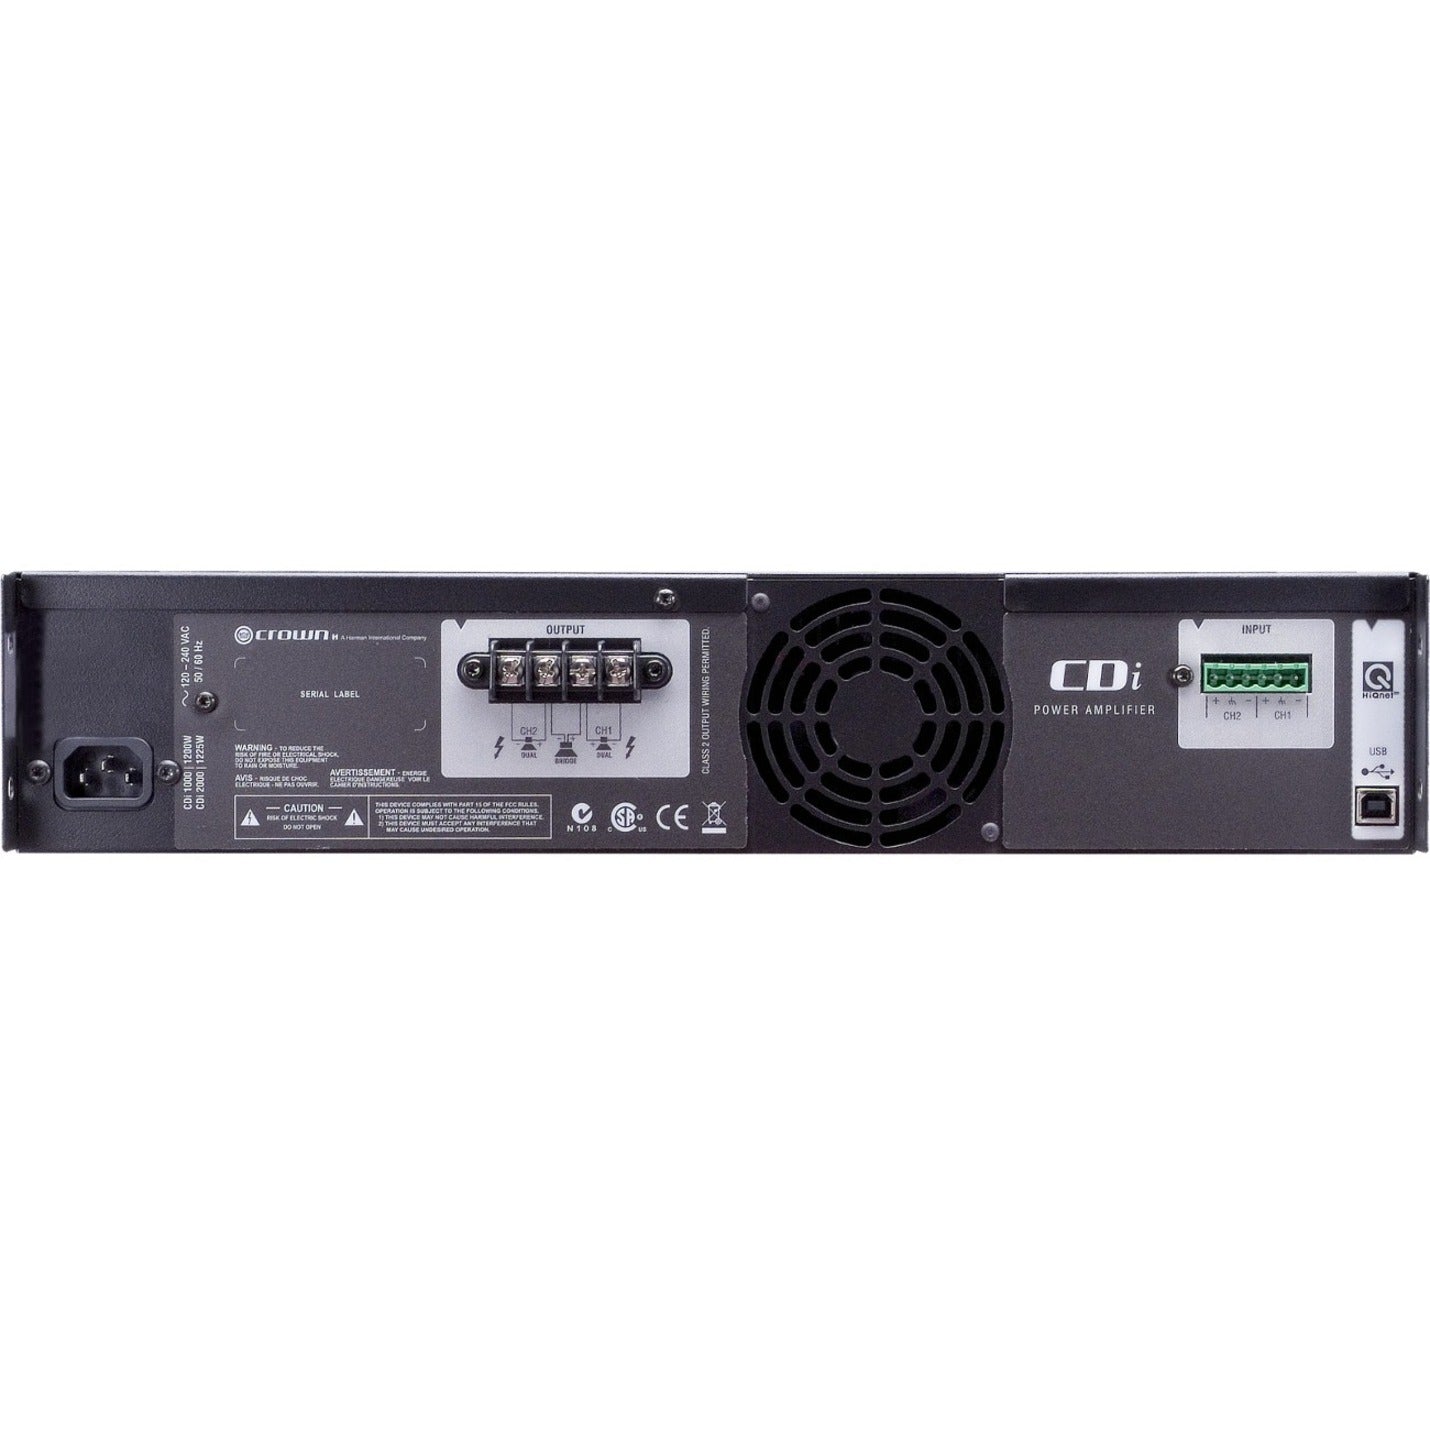 Crown NCDI2000VM 2000 Two-channel Power Amplifier, 1600W RMS, USB Connectivity